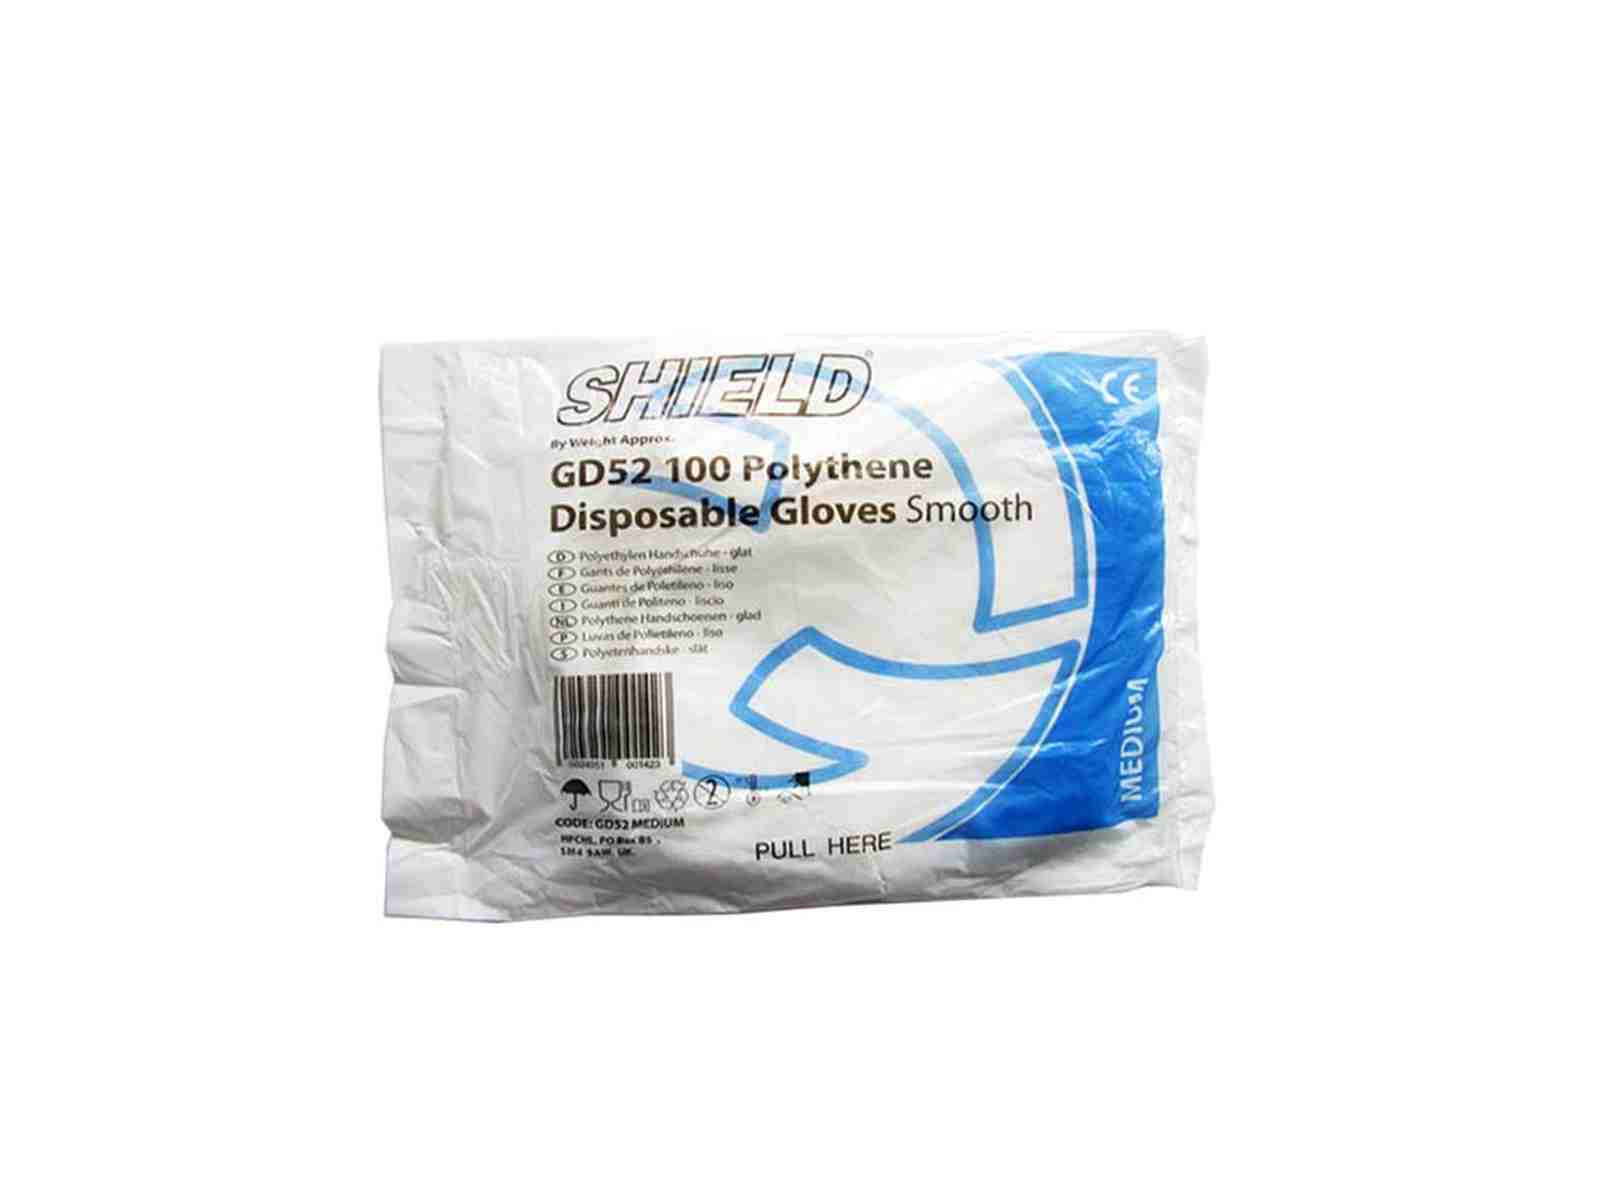 Shield Polythene Disposable Gloves Smooth (100)